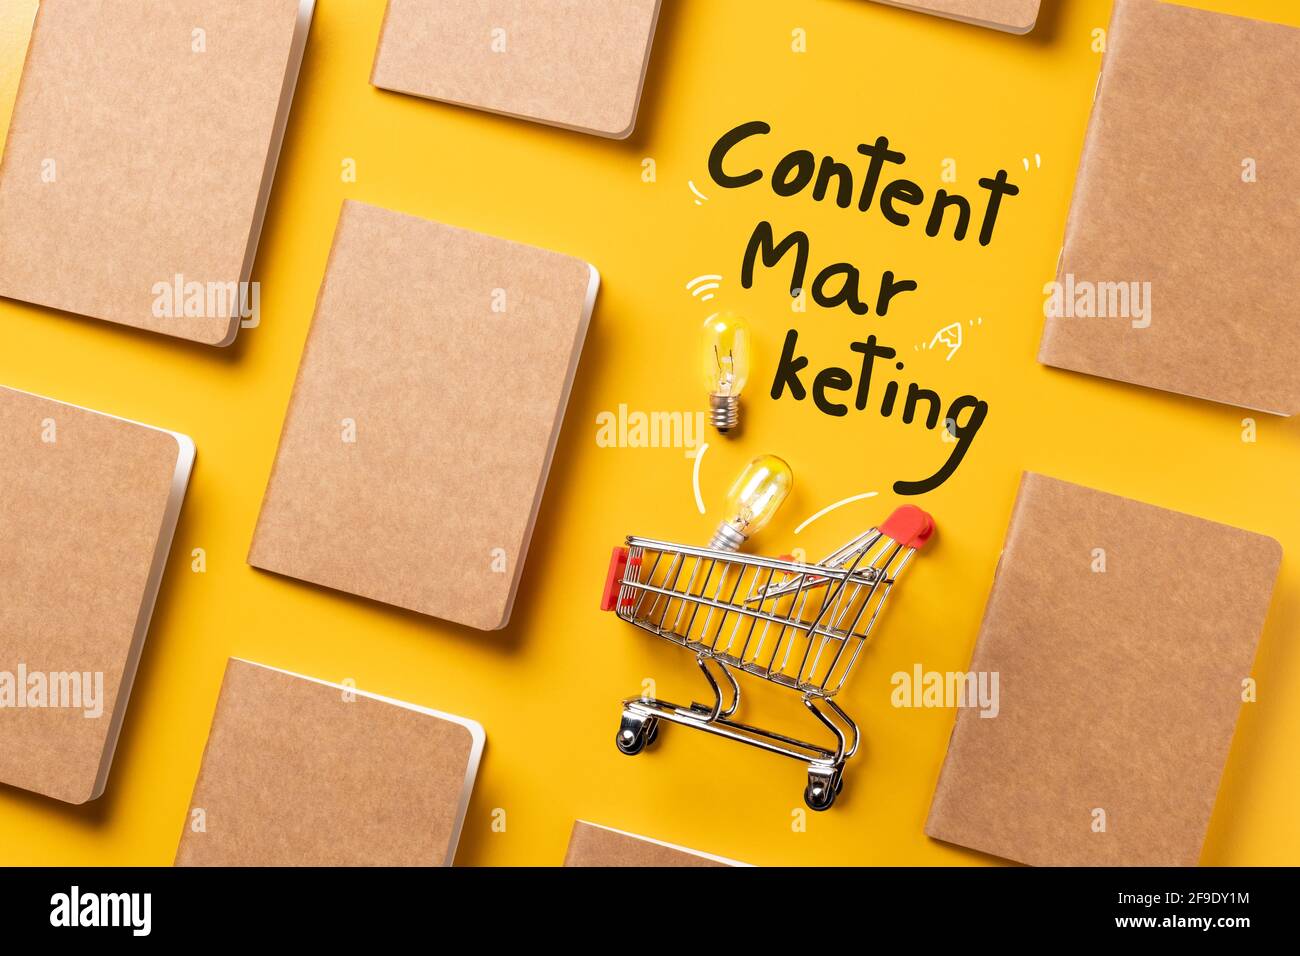 creativity content marketing concept,top view shopping cart with full of lightbulbs with Kraft paper book alignment in pattern on yellow desk surface. Stock Photo